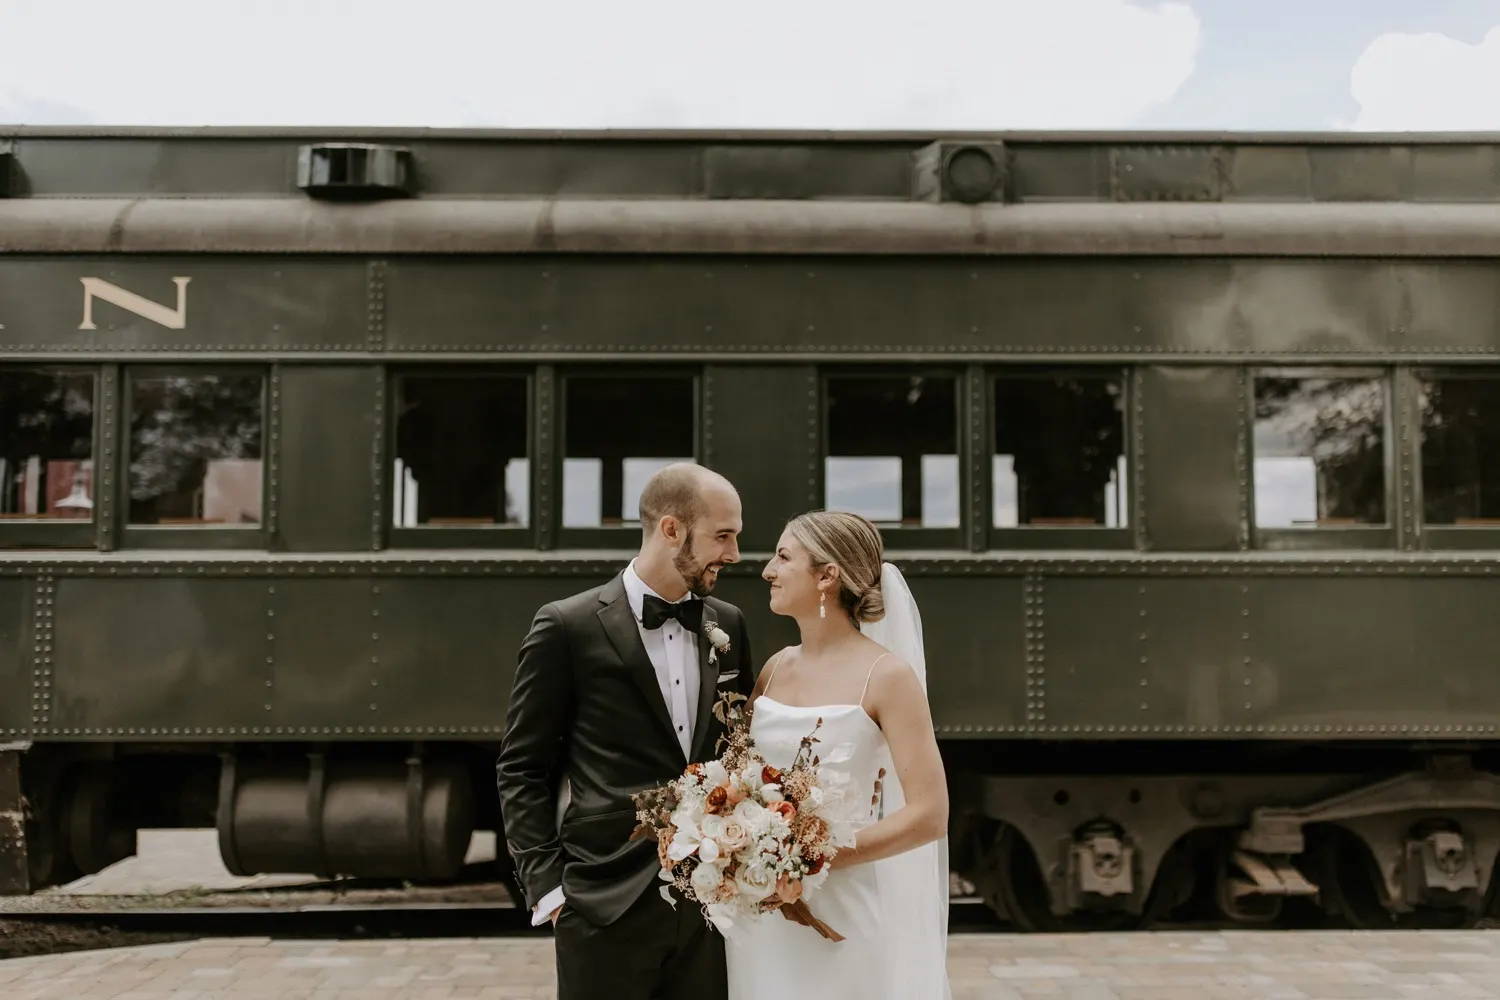 Bride and groom holding bouquet in front of old train